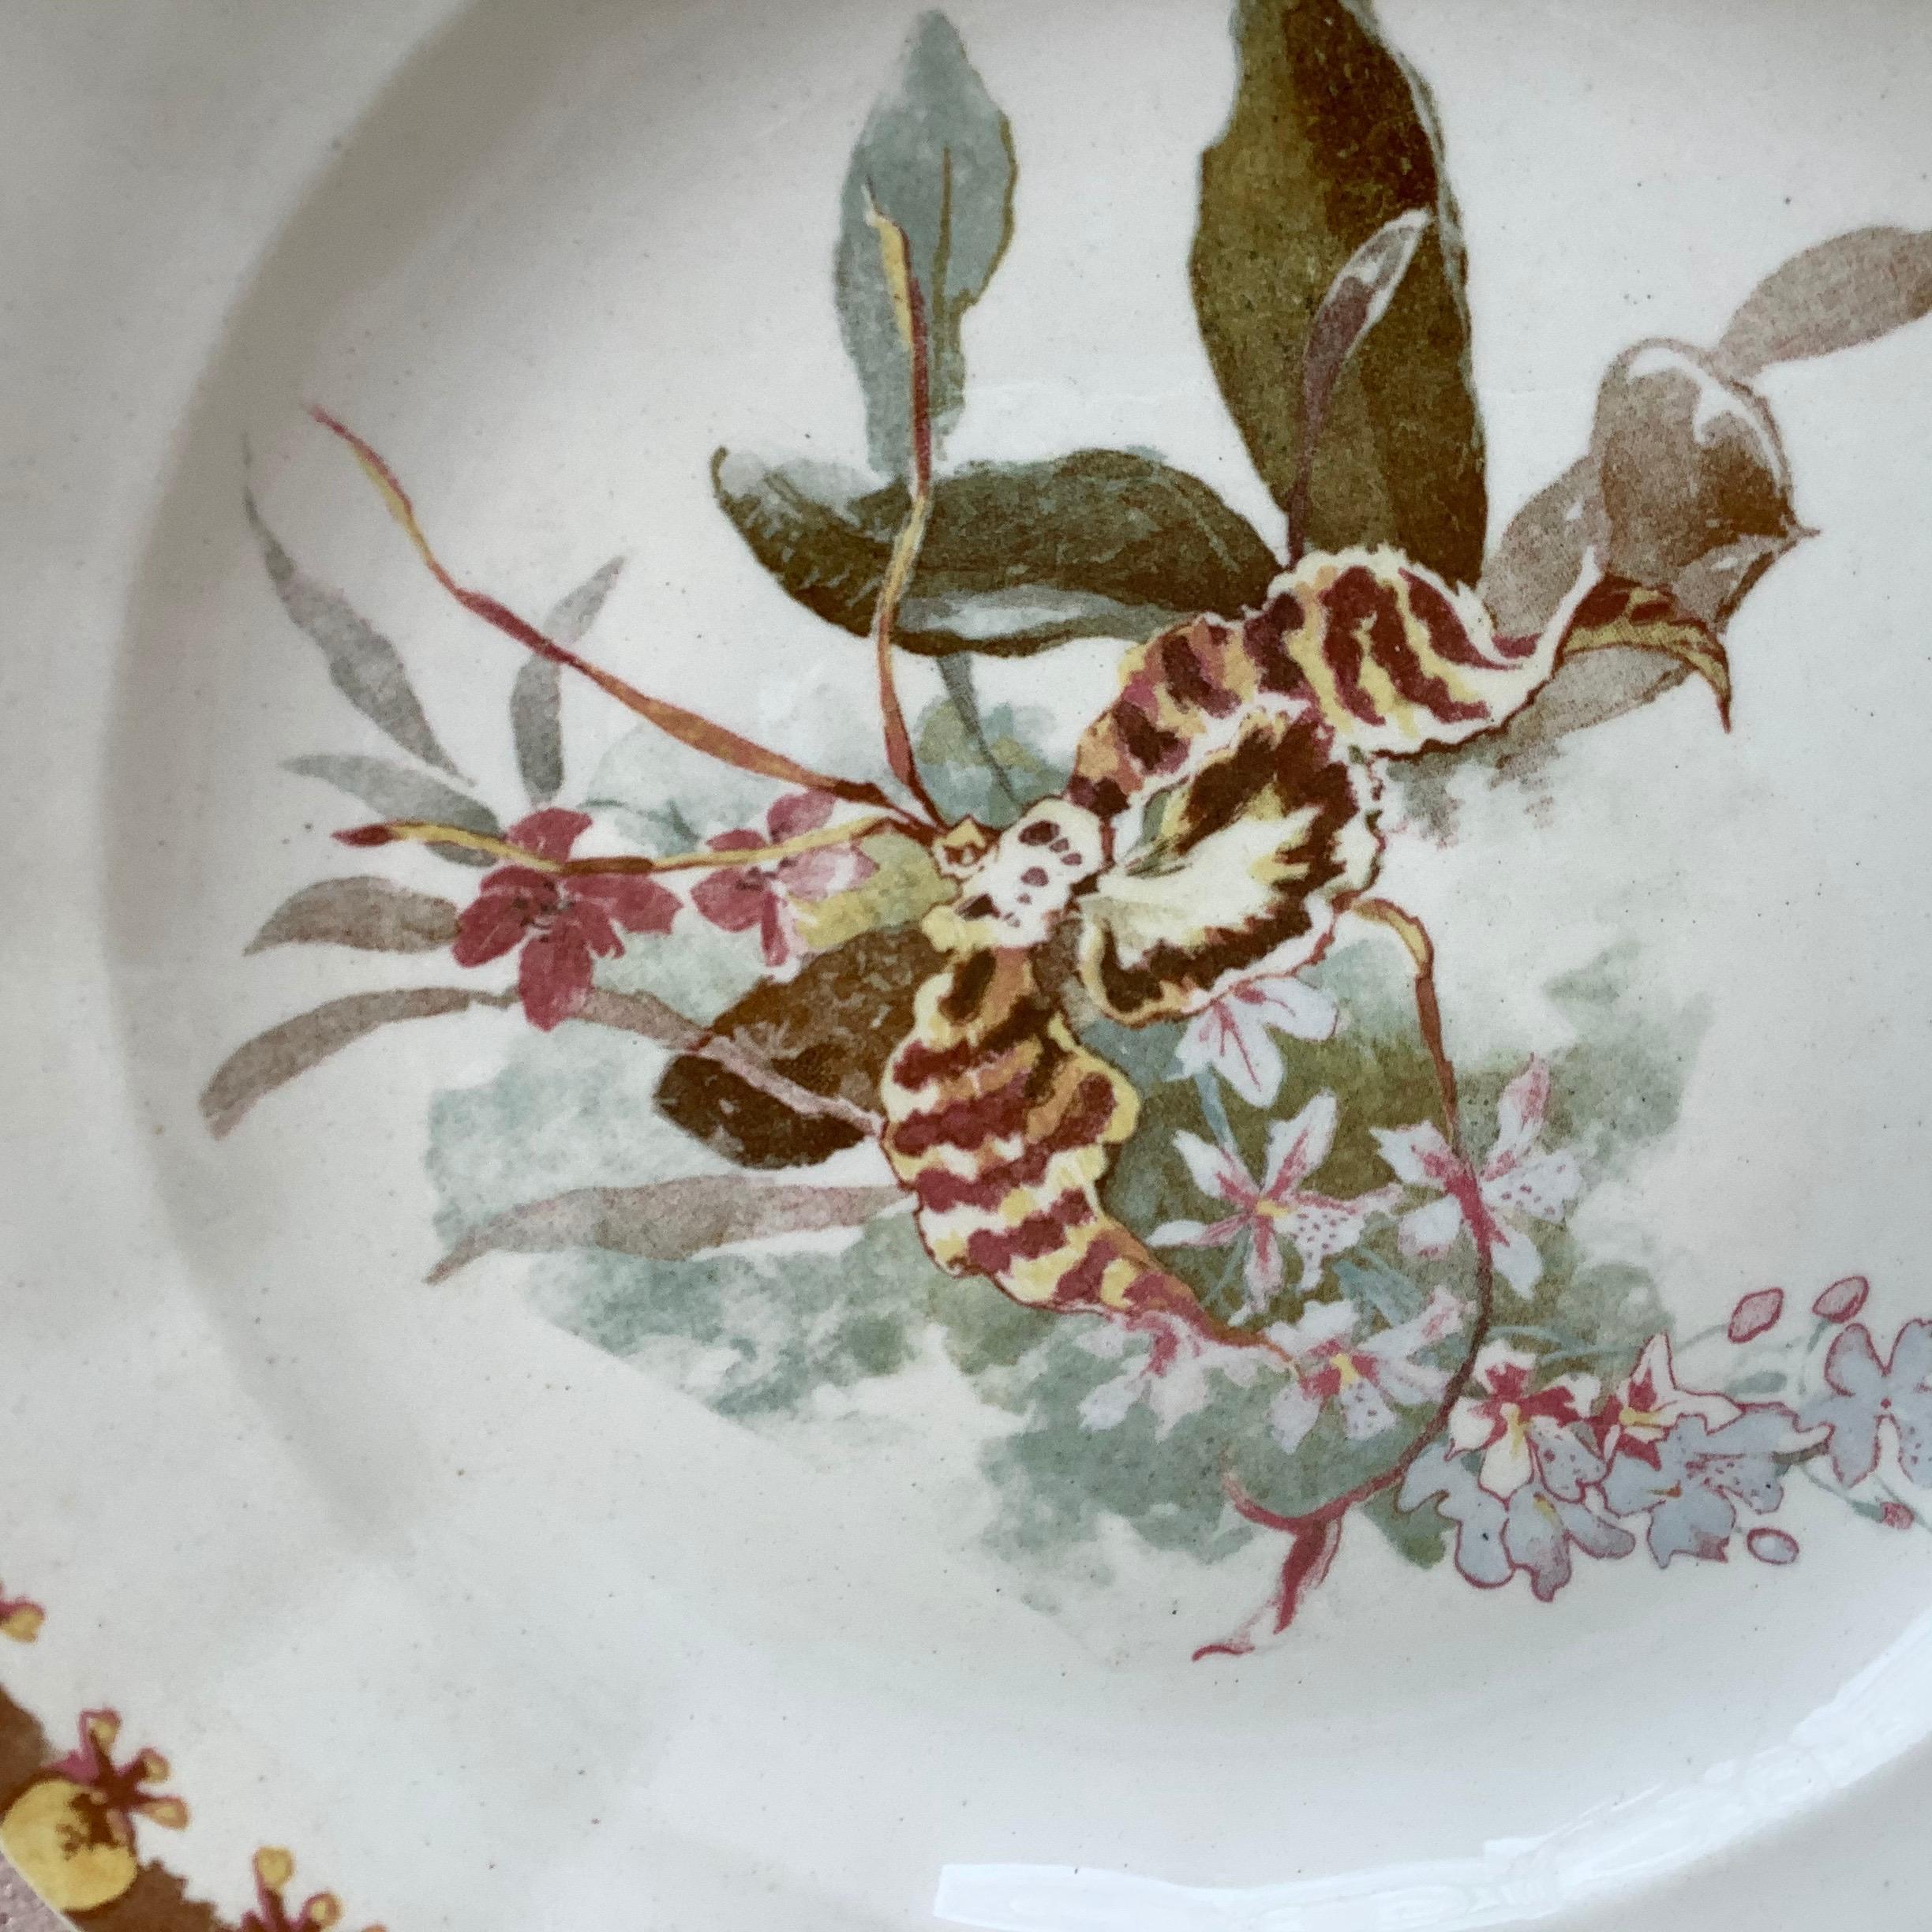 French plate with orchid signed Hippolyte Boulenger Choisy le Roi, circa 1890.
The manufacture of Choisy le Roi was one of the most important manufactures at the end of 19th century, they produced very high quality ceramics of all kinds as Majolica.